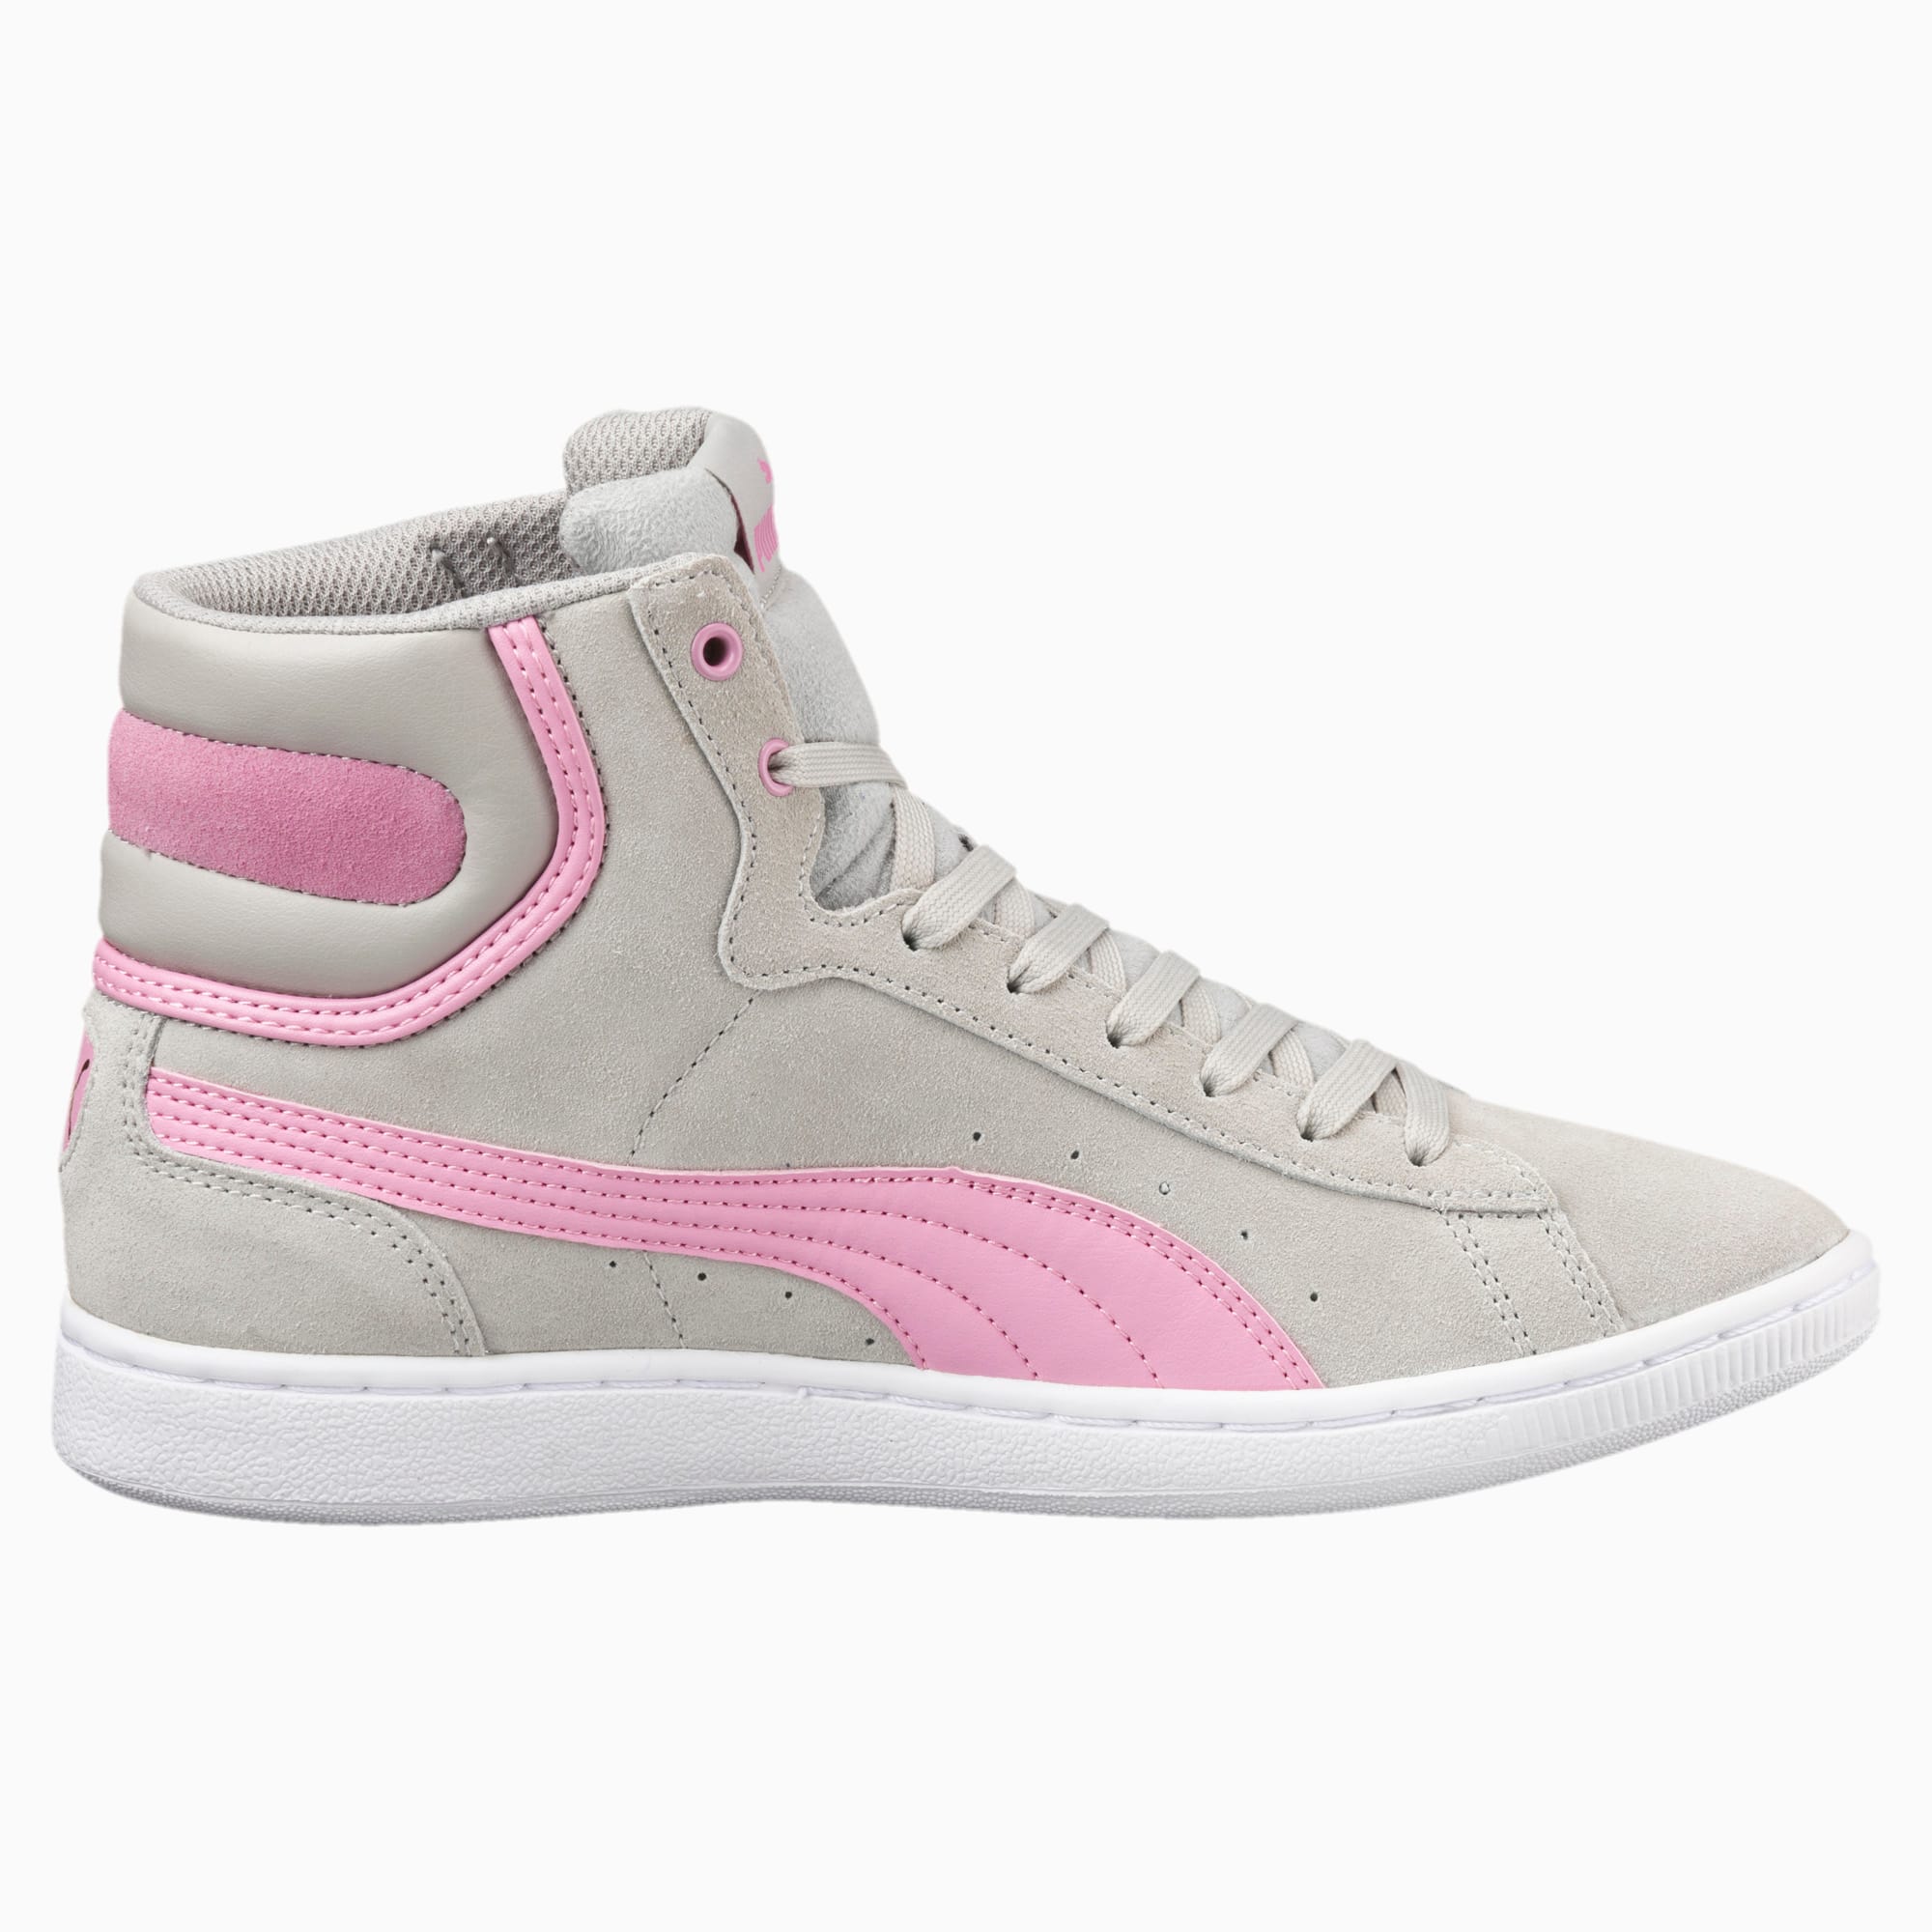 Vikky Mid Women's High Top Sneakers 